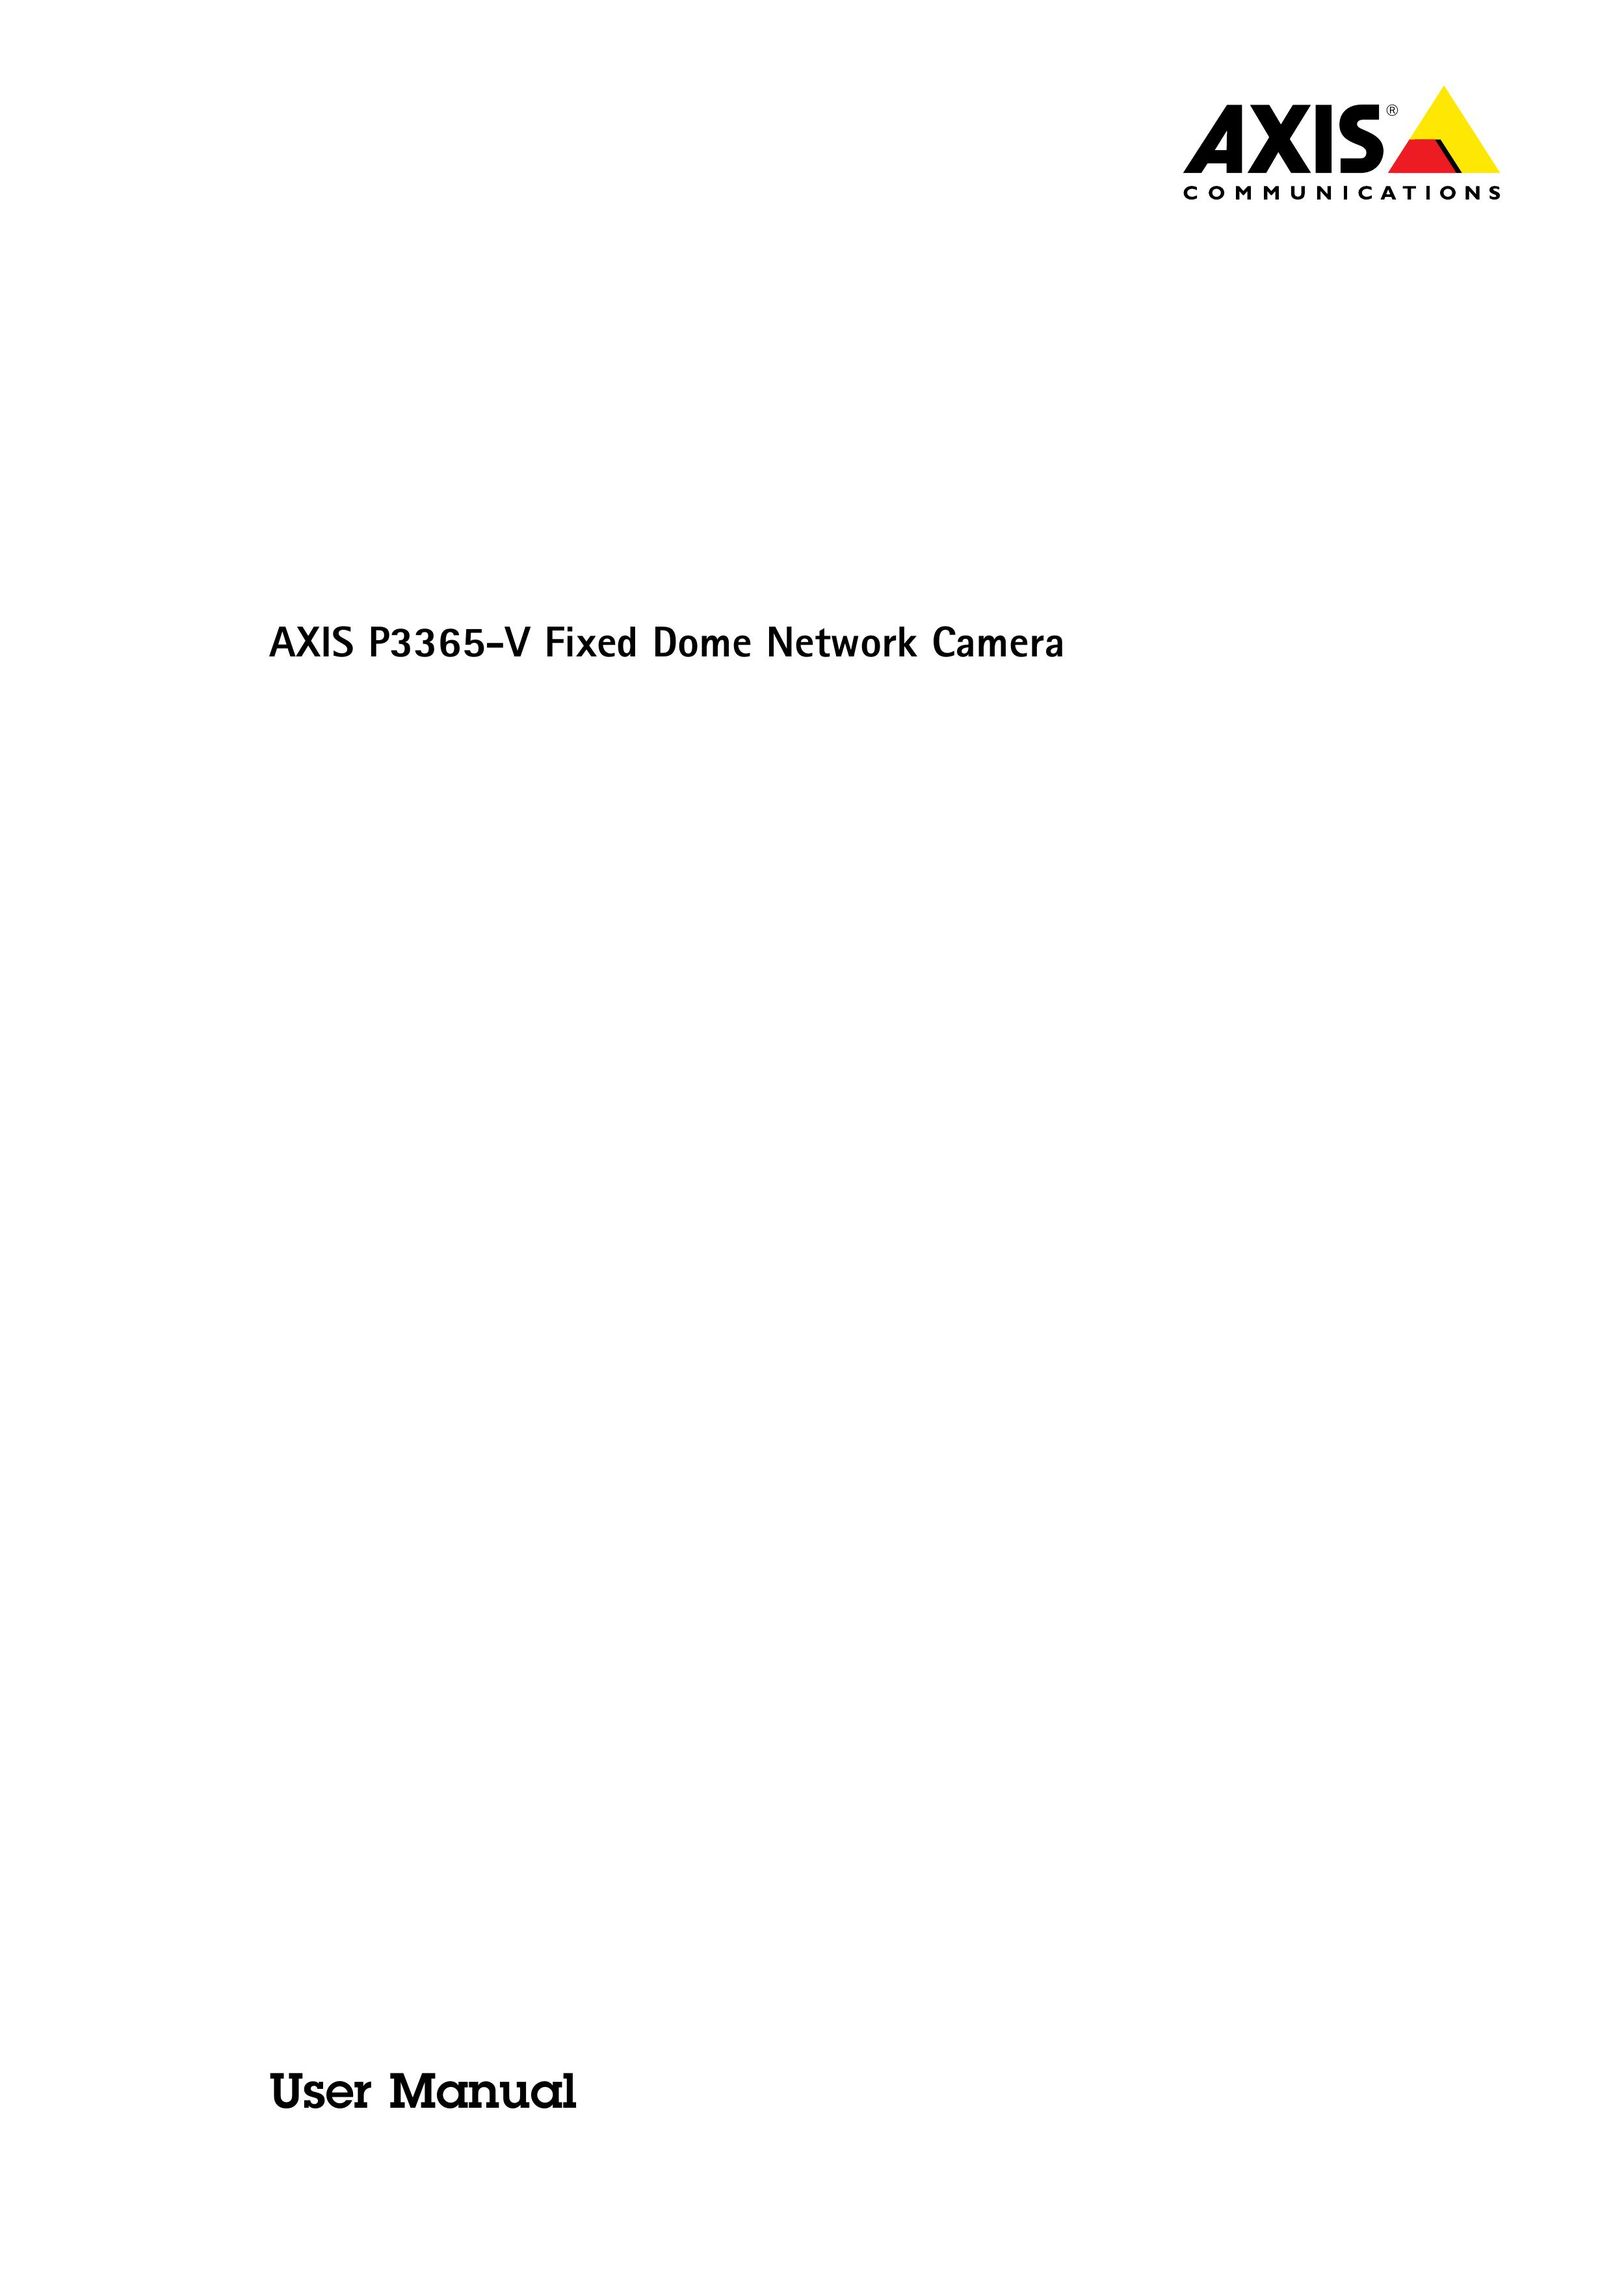 Axis Communications AXIS P3365V PDAs & Smartphones User Manual